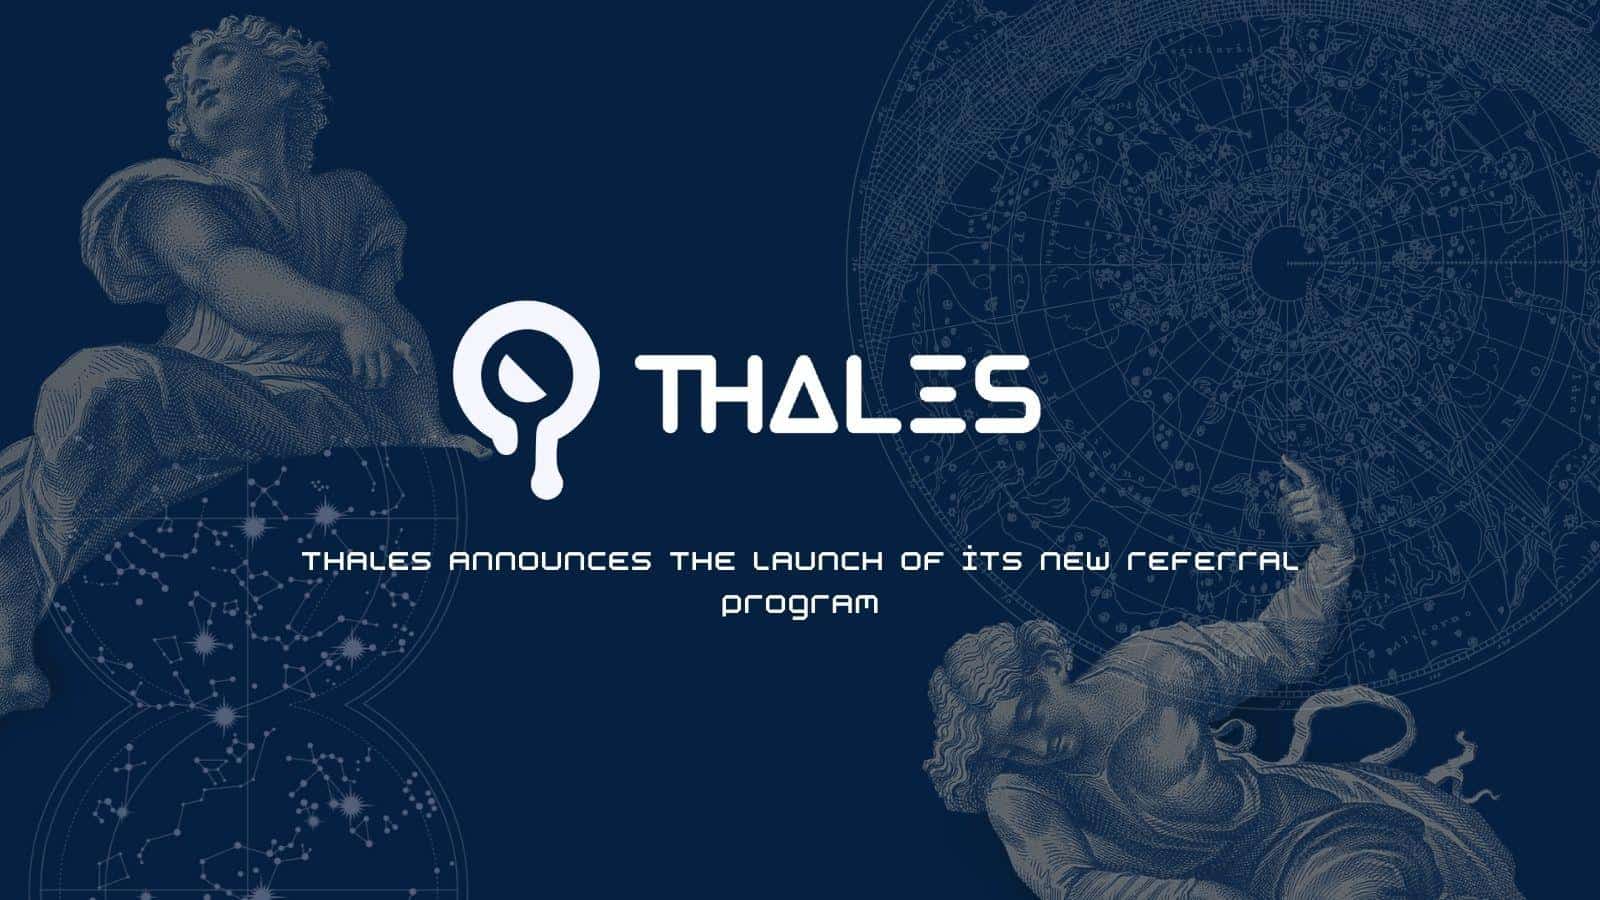 Thales-announces-the-launch-of-its-new-referral-program